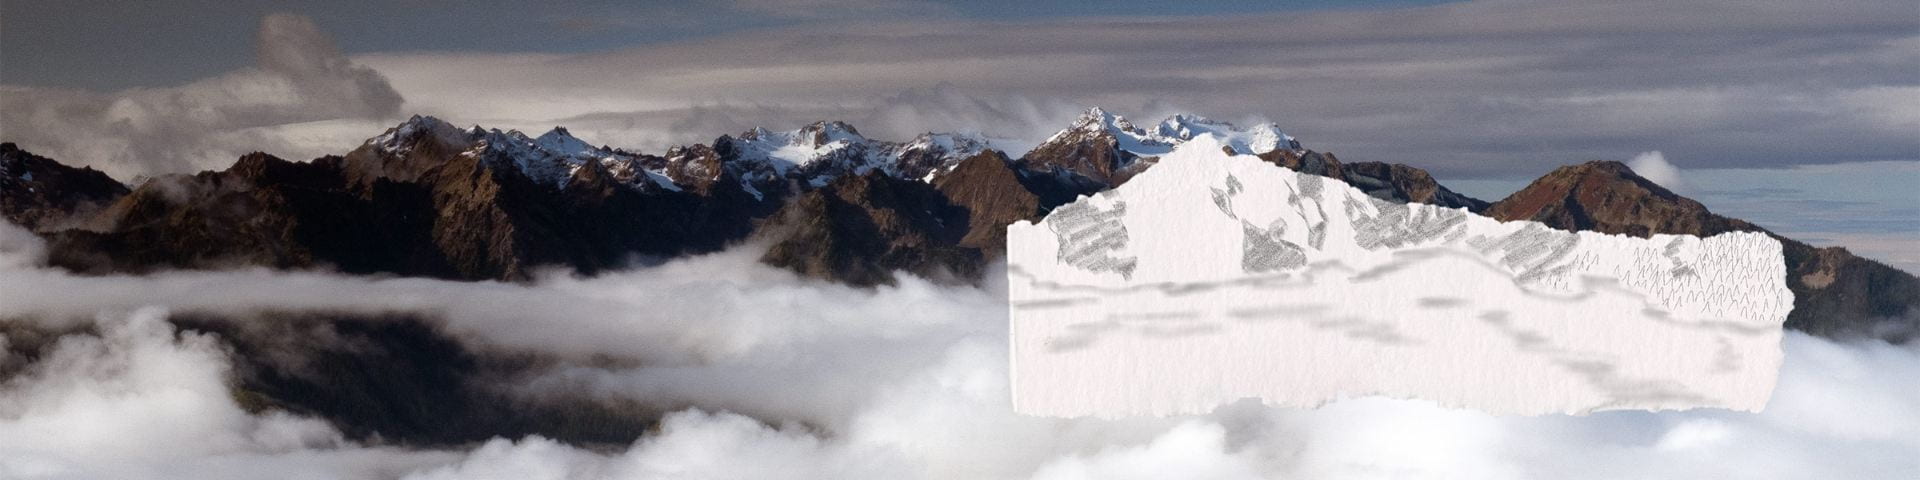 A photo of mountains and clouds with a sketch of the mountains overlapping